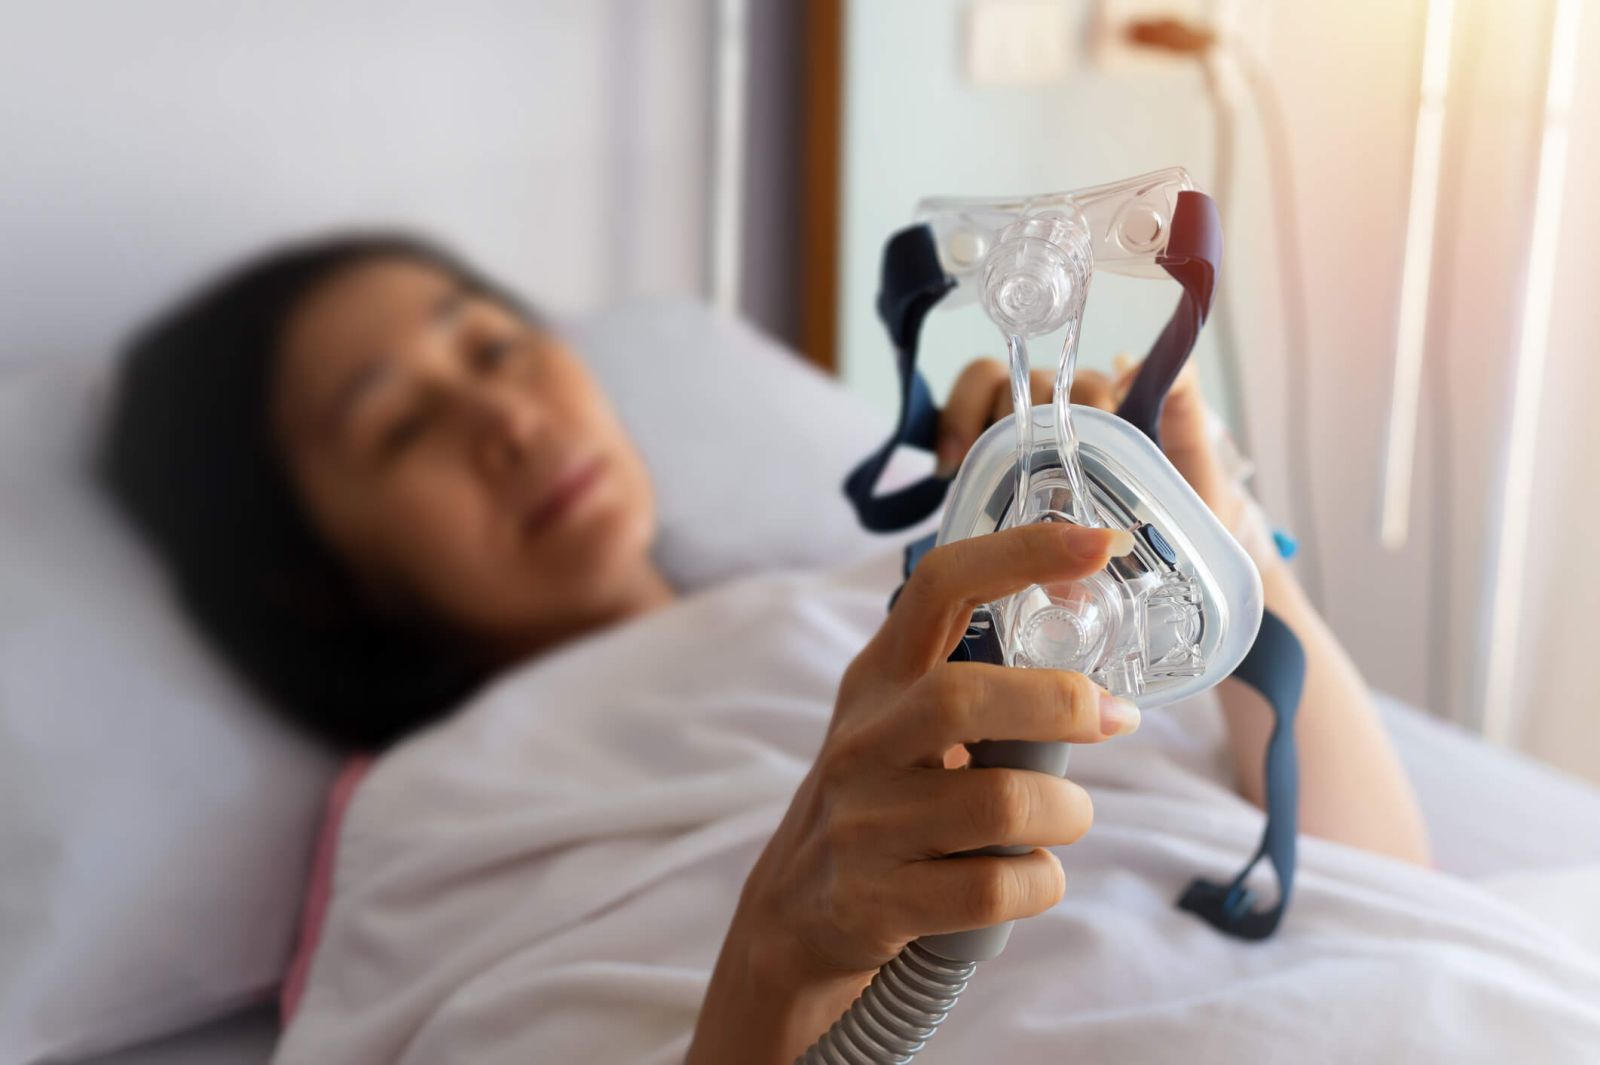 Asian woman lying in bed holding CPAP mask in hands